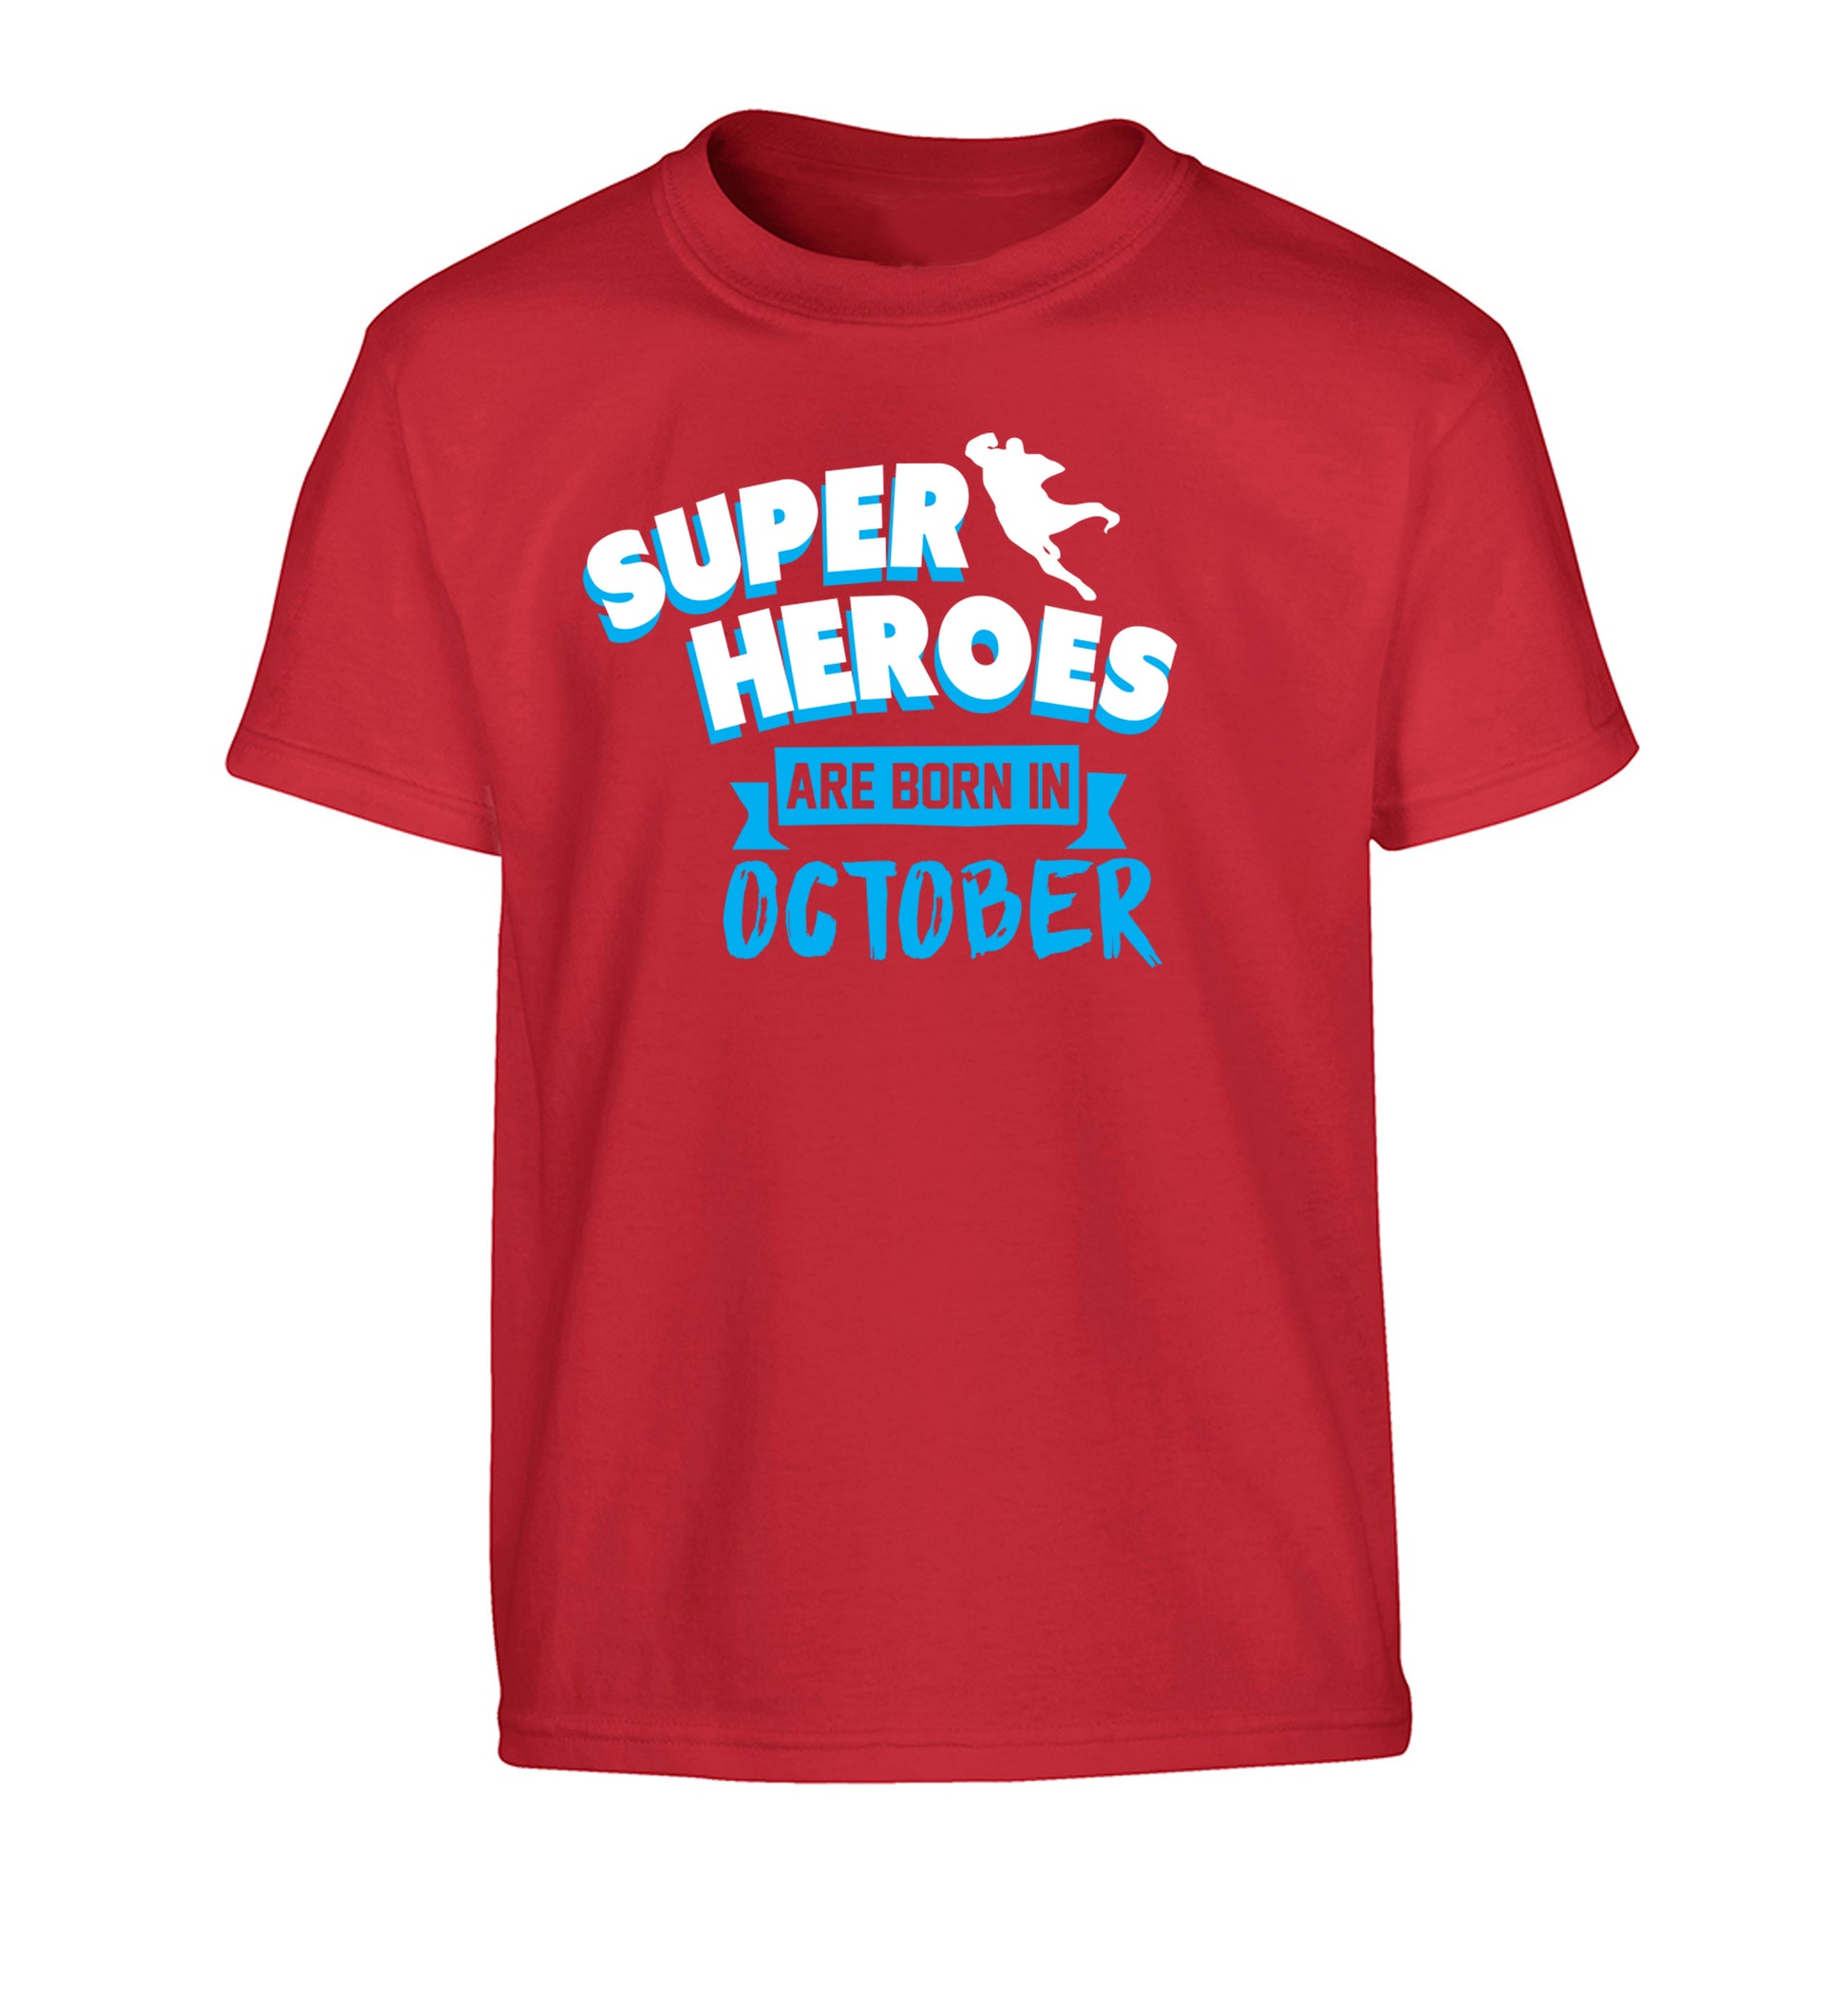 Superheroes are born in October Children's red Tshirt 12-13 Years